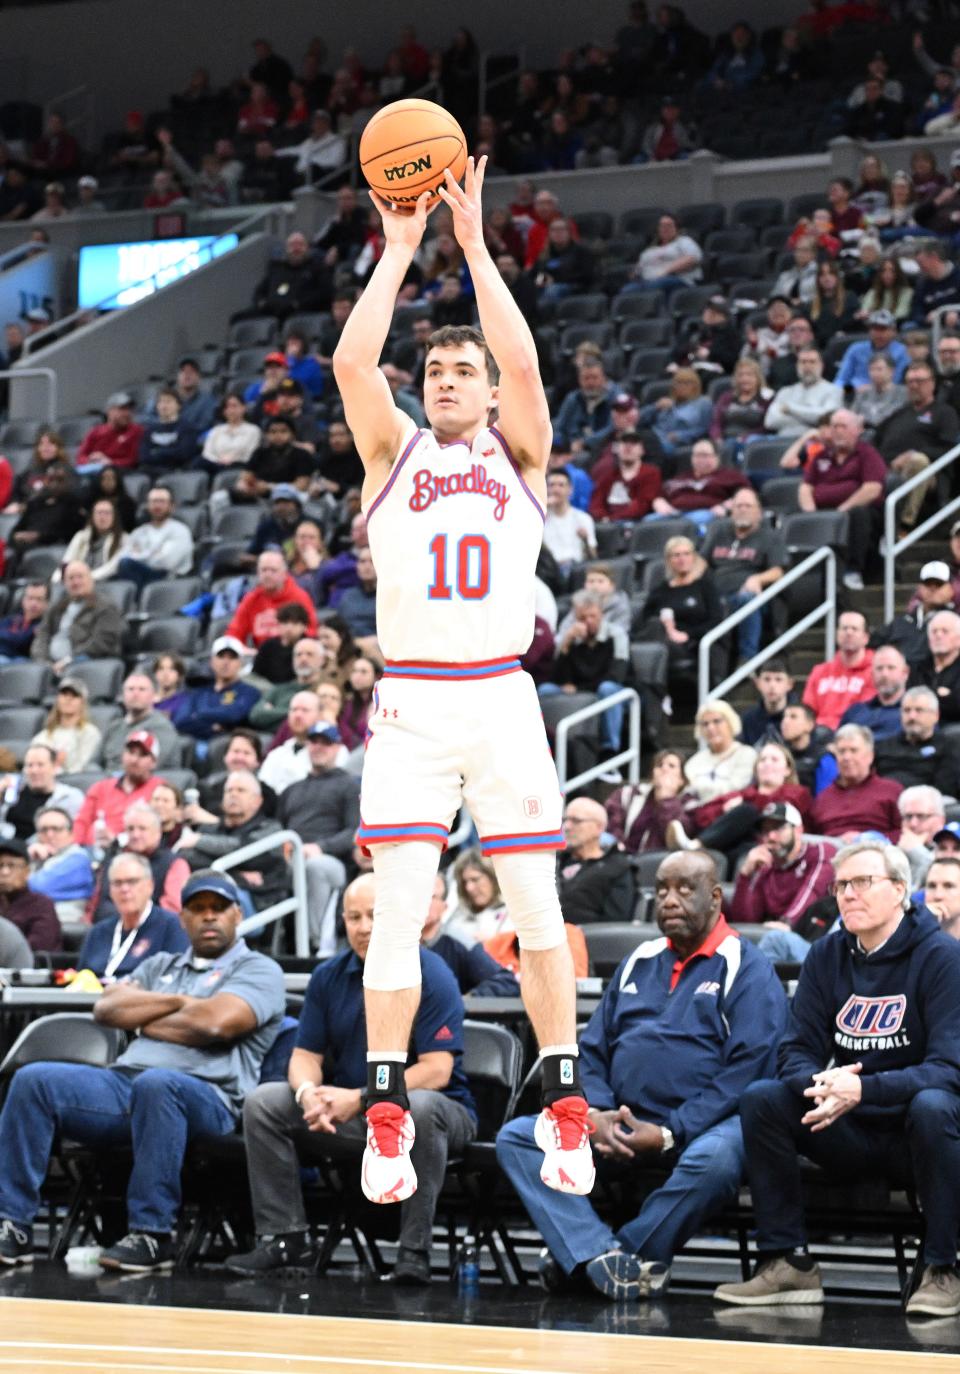 Connor Hickman hits a 3 right in front of the UIC bench during the Braves 74-47 blowout win over UIC in the quarterfinals of the Missouri Valley Conference Tournament at Enterprise Center in St. Louis on Friday, March 8, 2024.